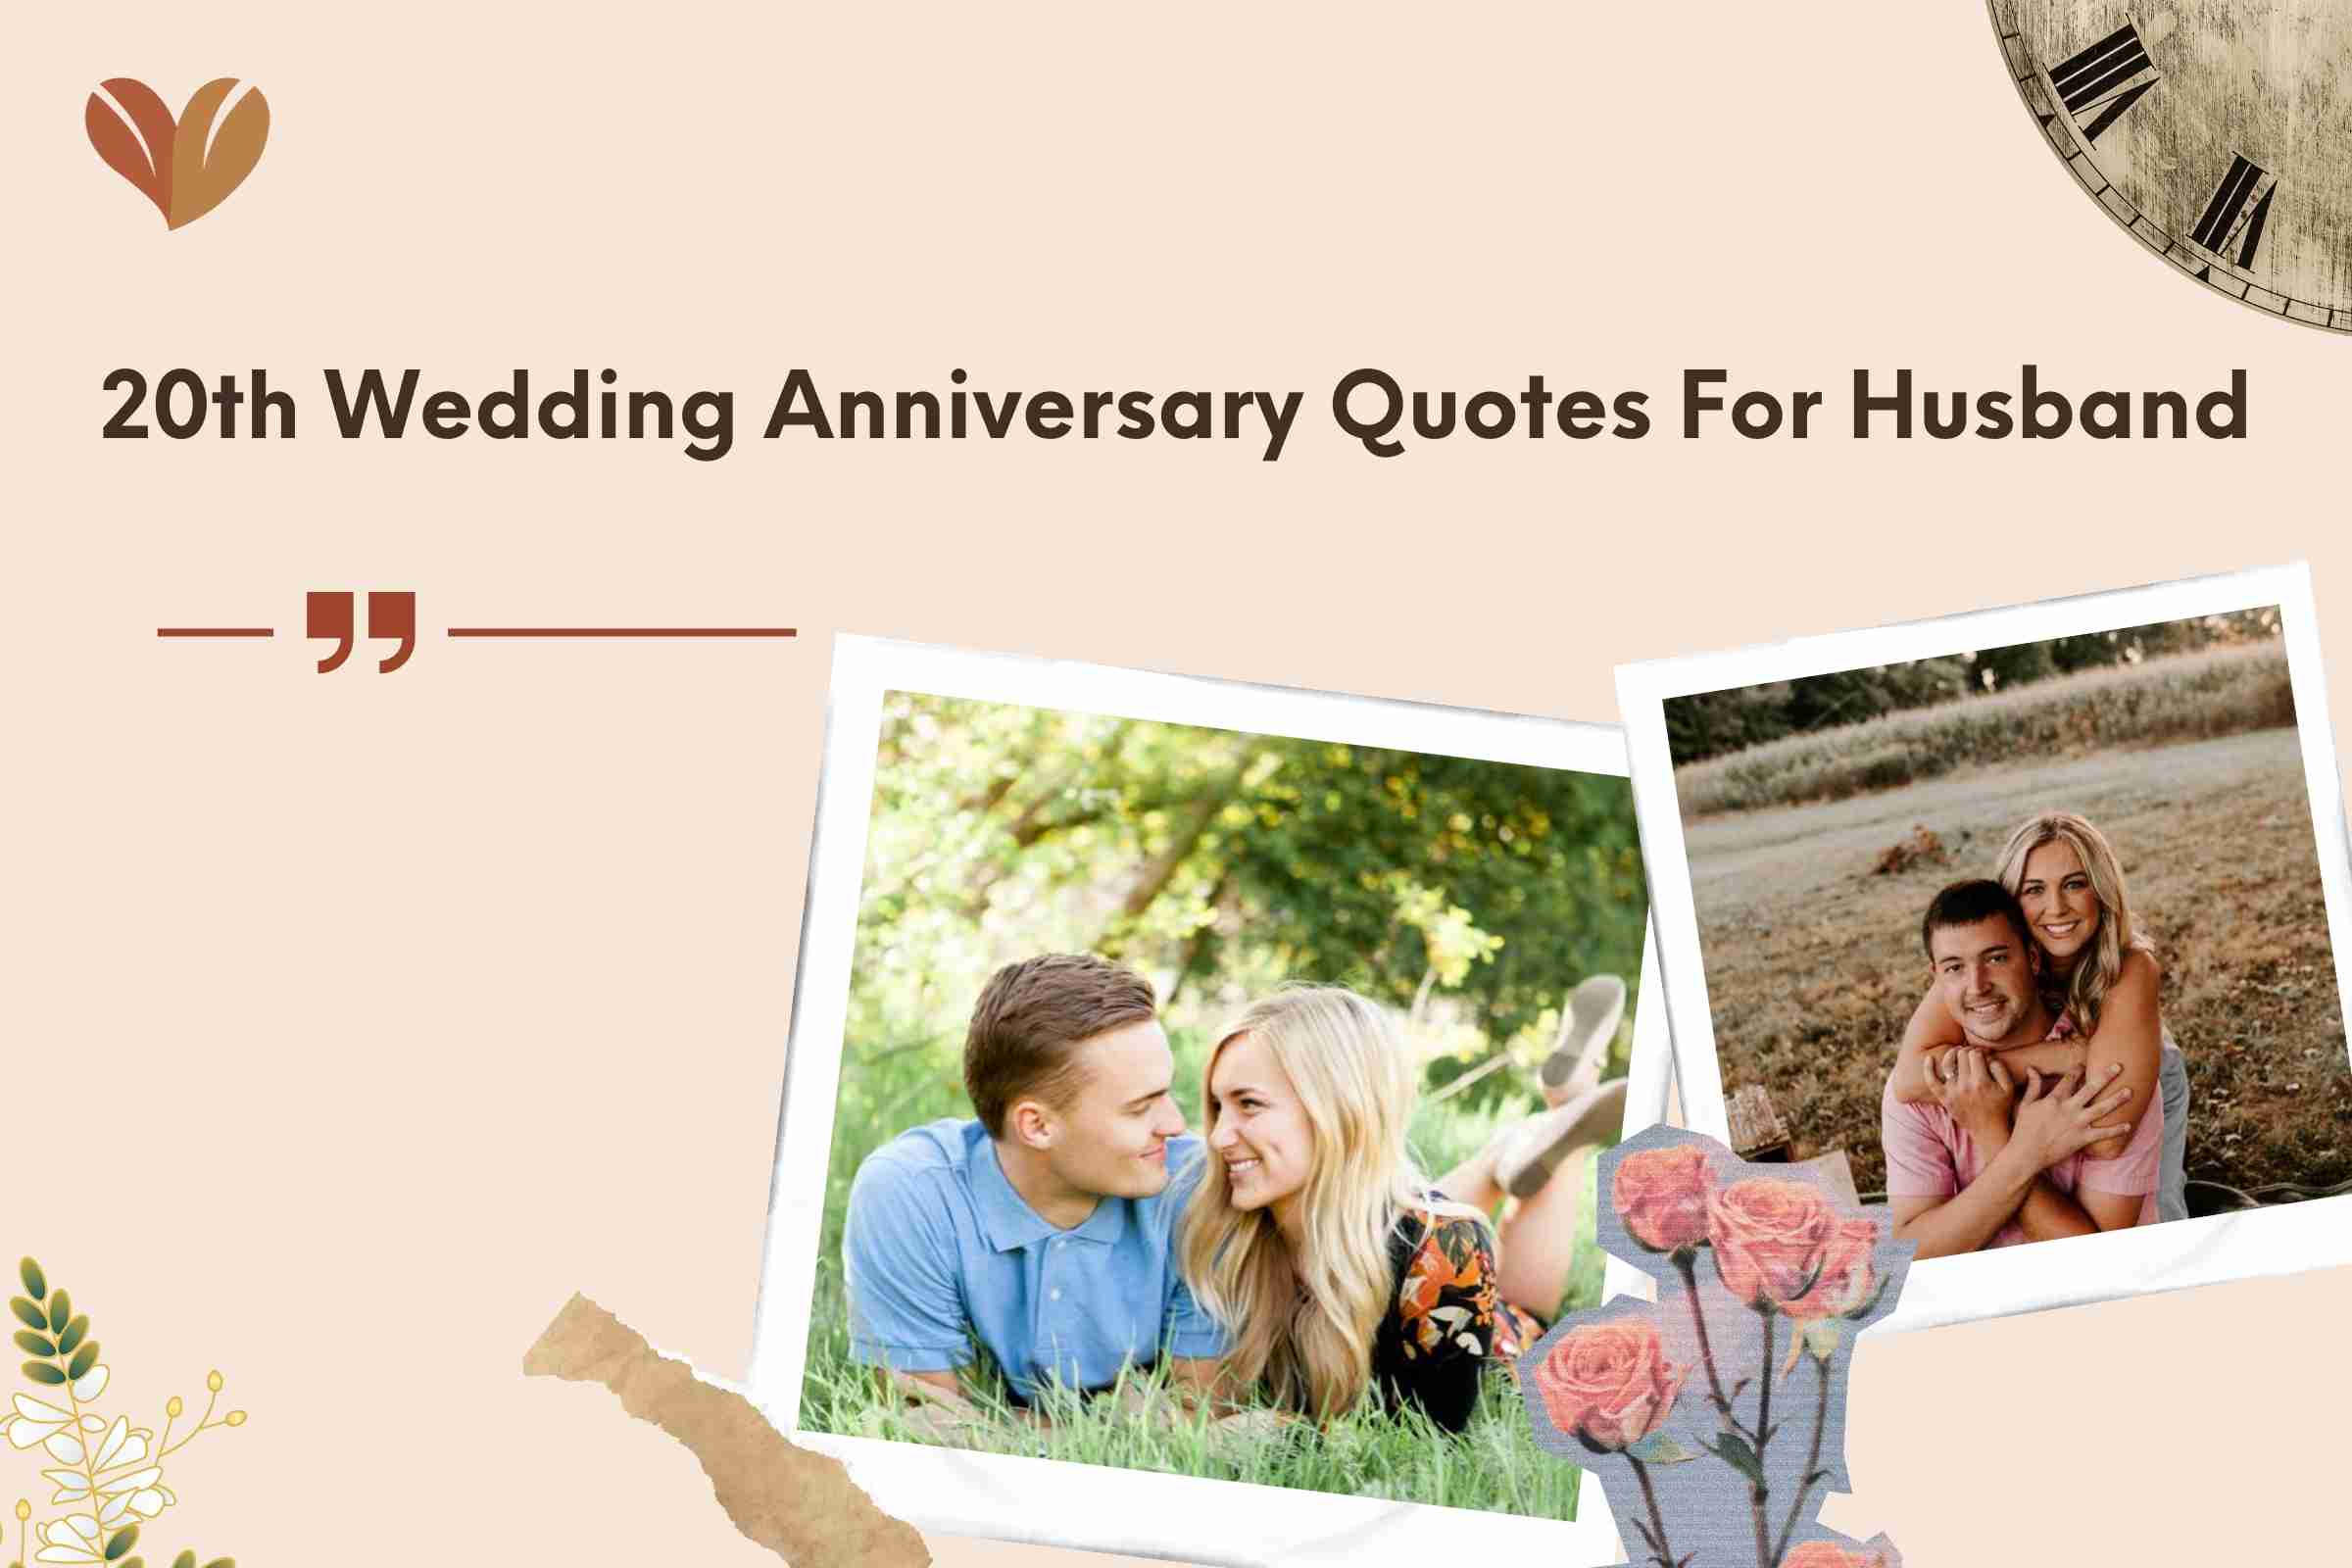 20th Wedding Anniversary Quotes For Husband